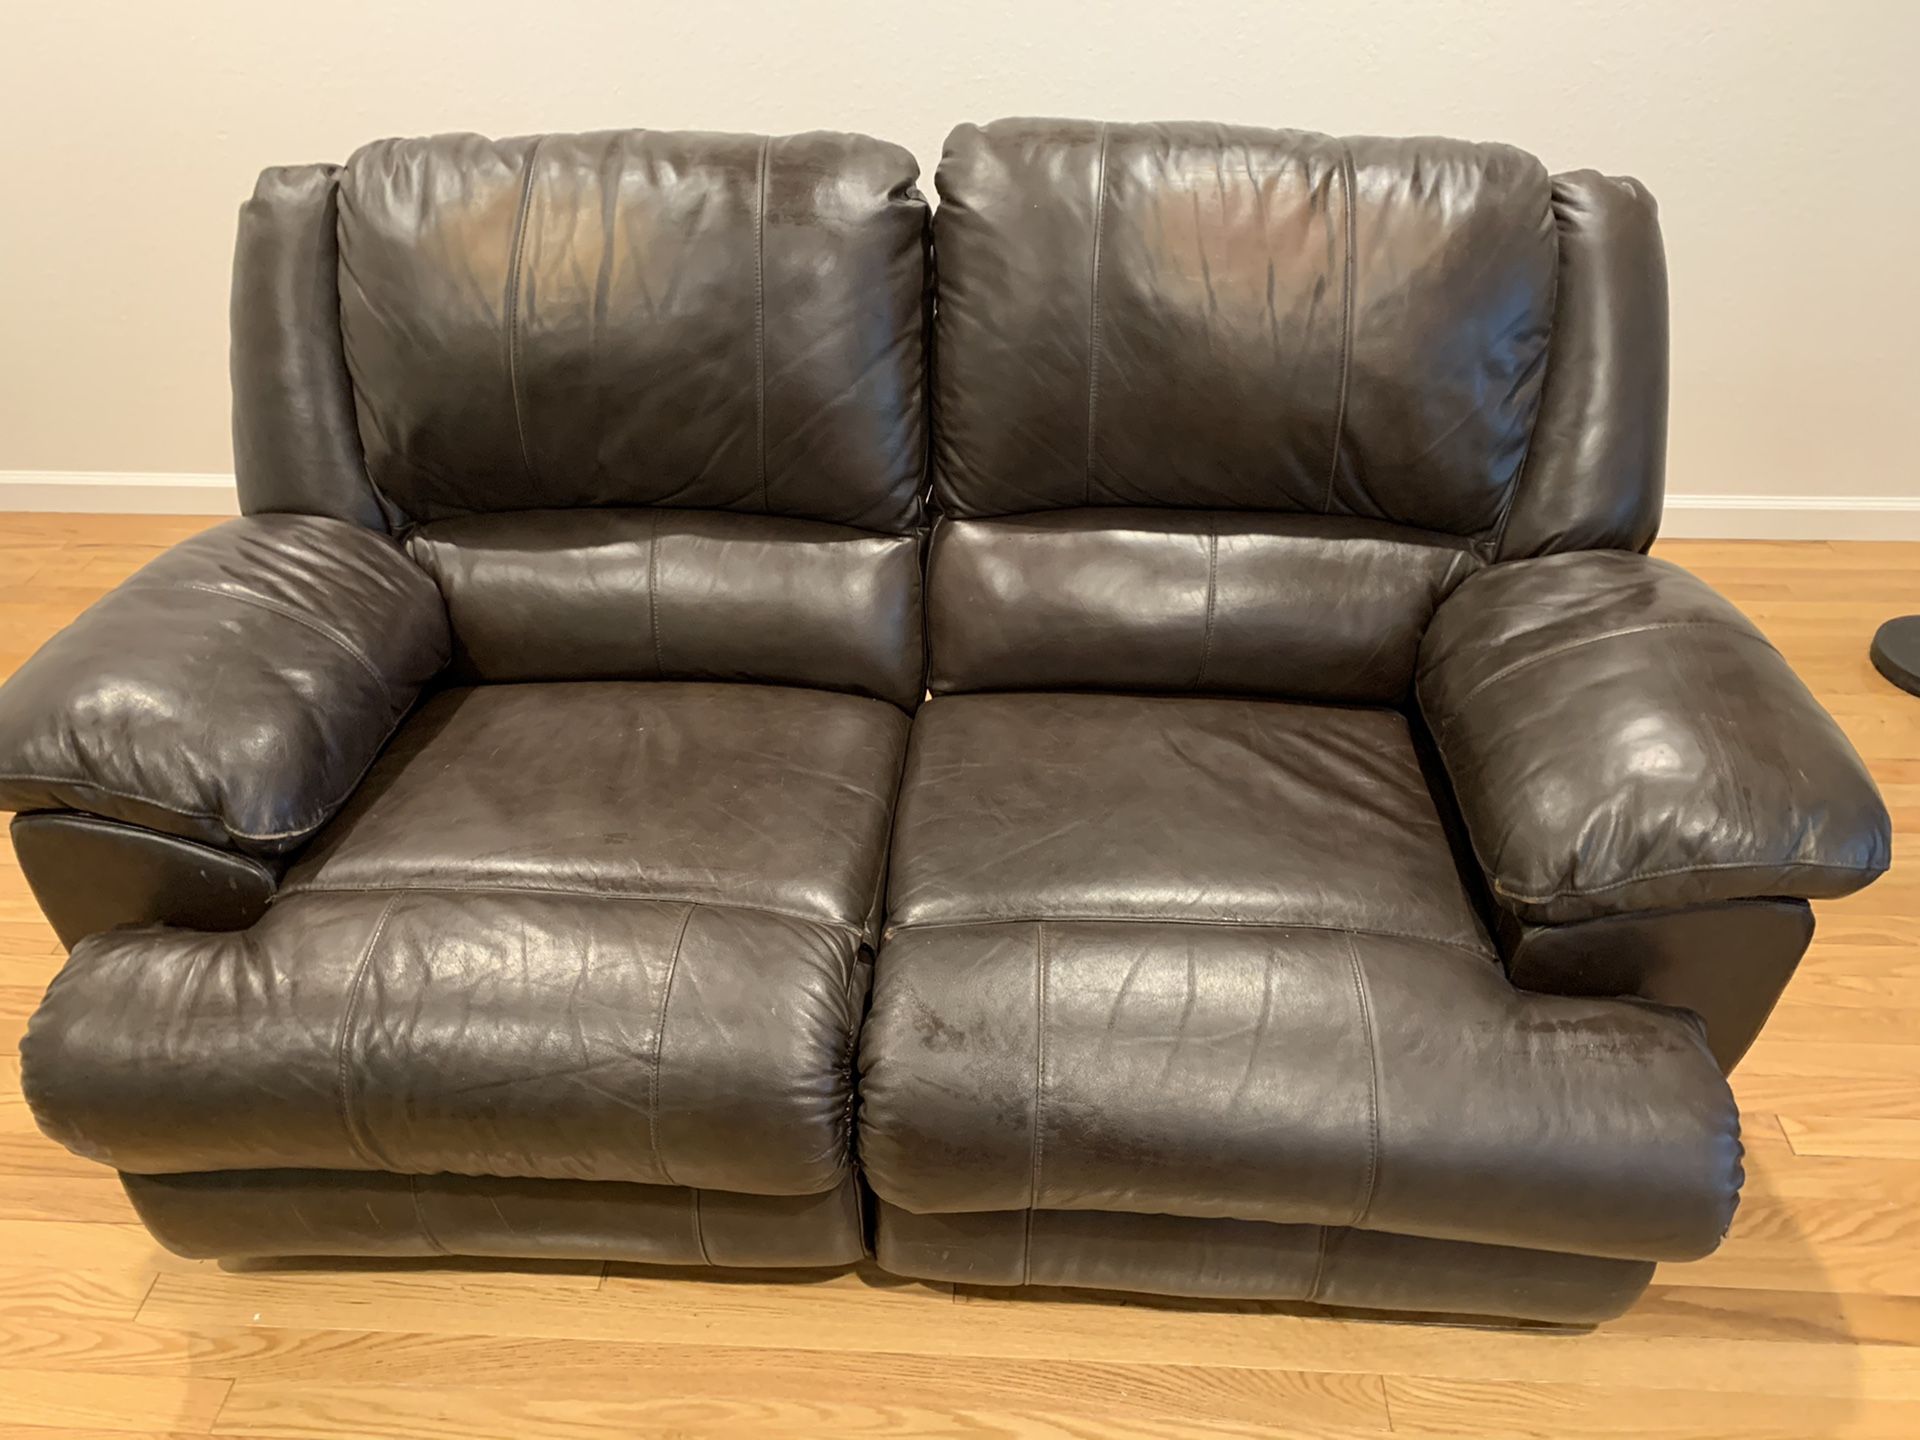 Reclining couch and side chair